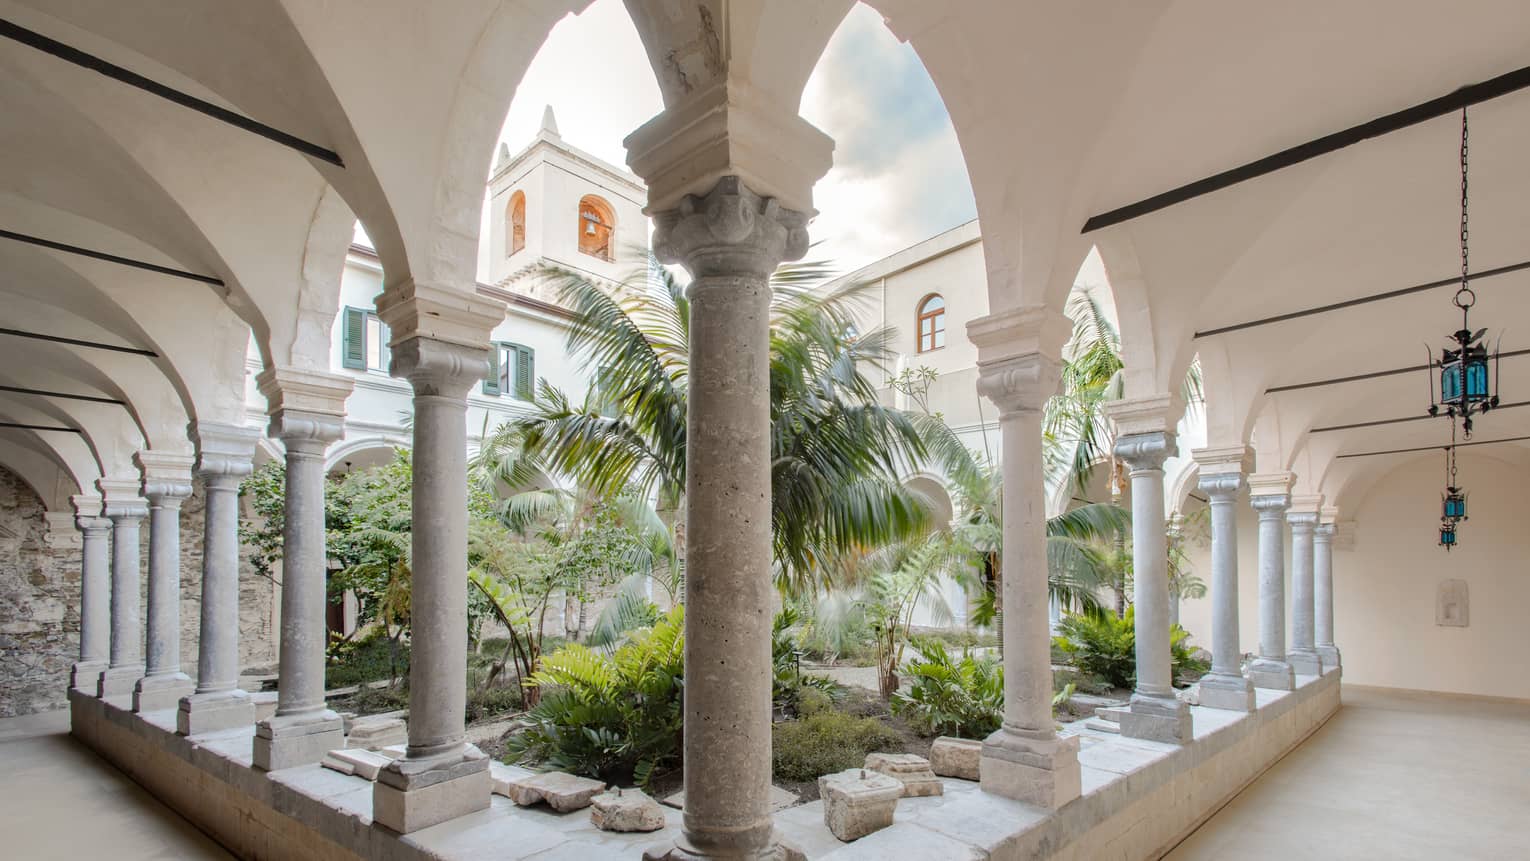 Outdoor cloister courtyard, palm trees in the middle